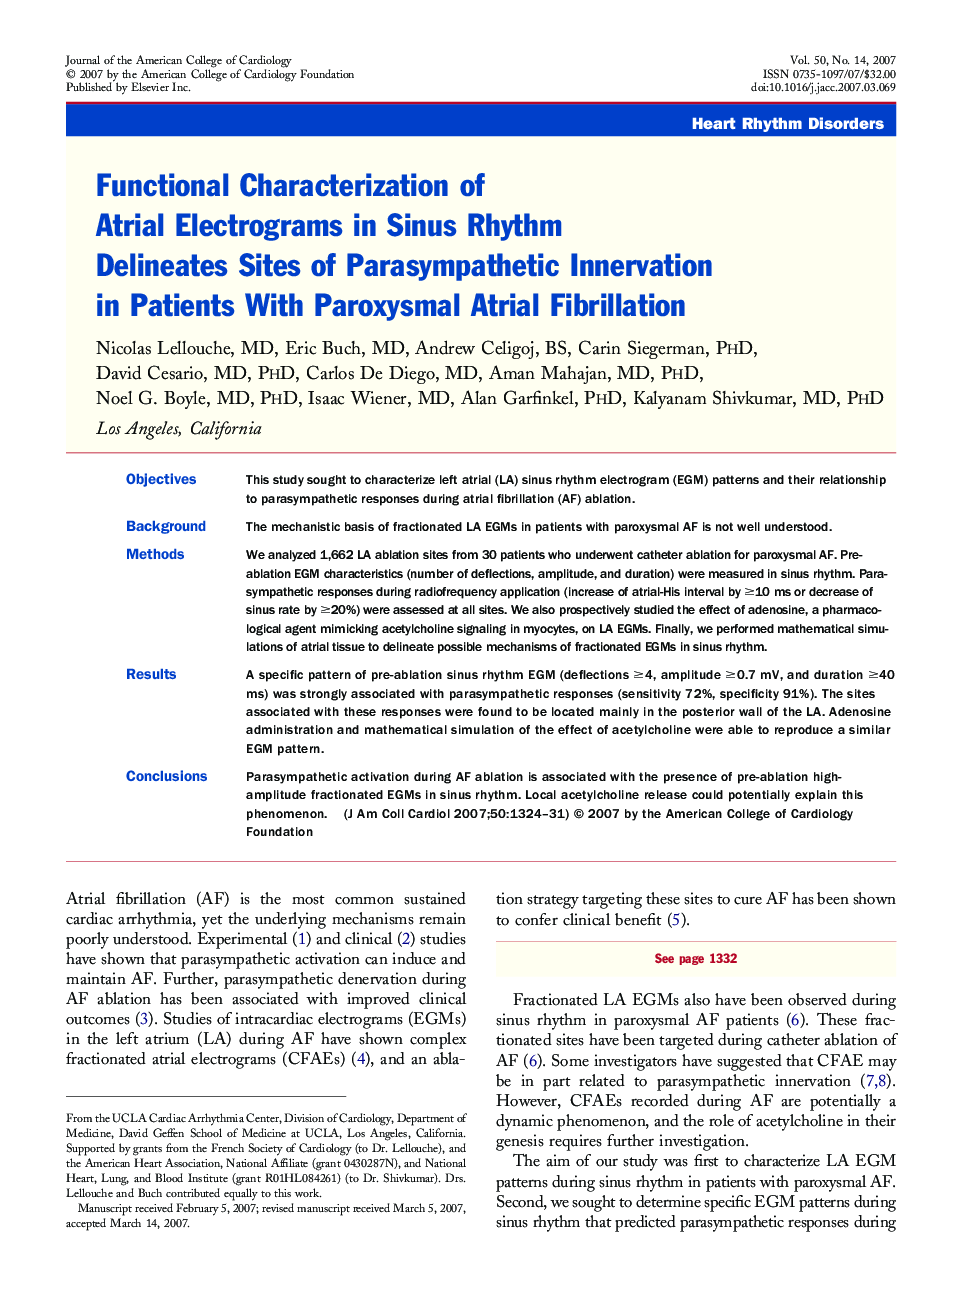 Functional Characterization of Atrial Electrograms in Sinus Rhythm Delineates Sites of Parasympathetic Innervation in Patients With Paroxysmal Atrial Fibrillation 